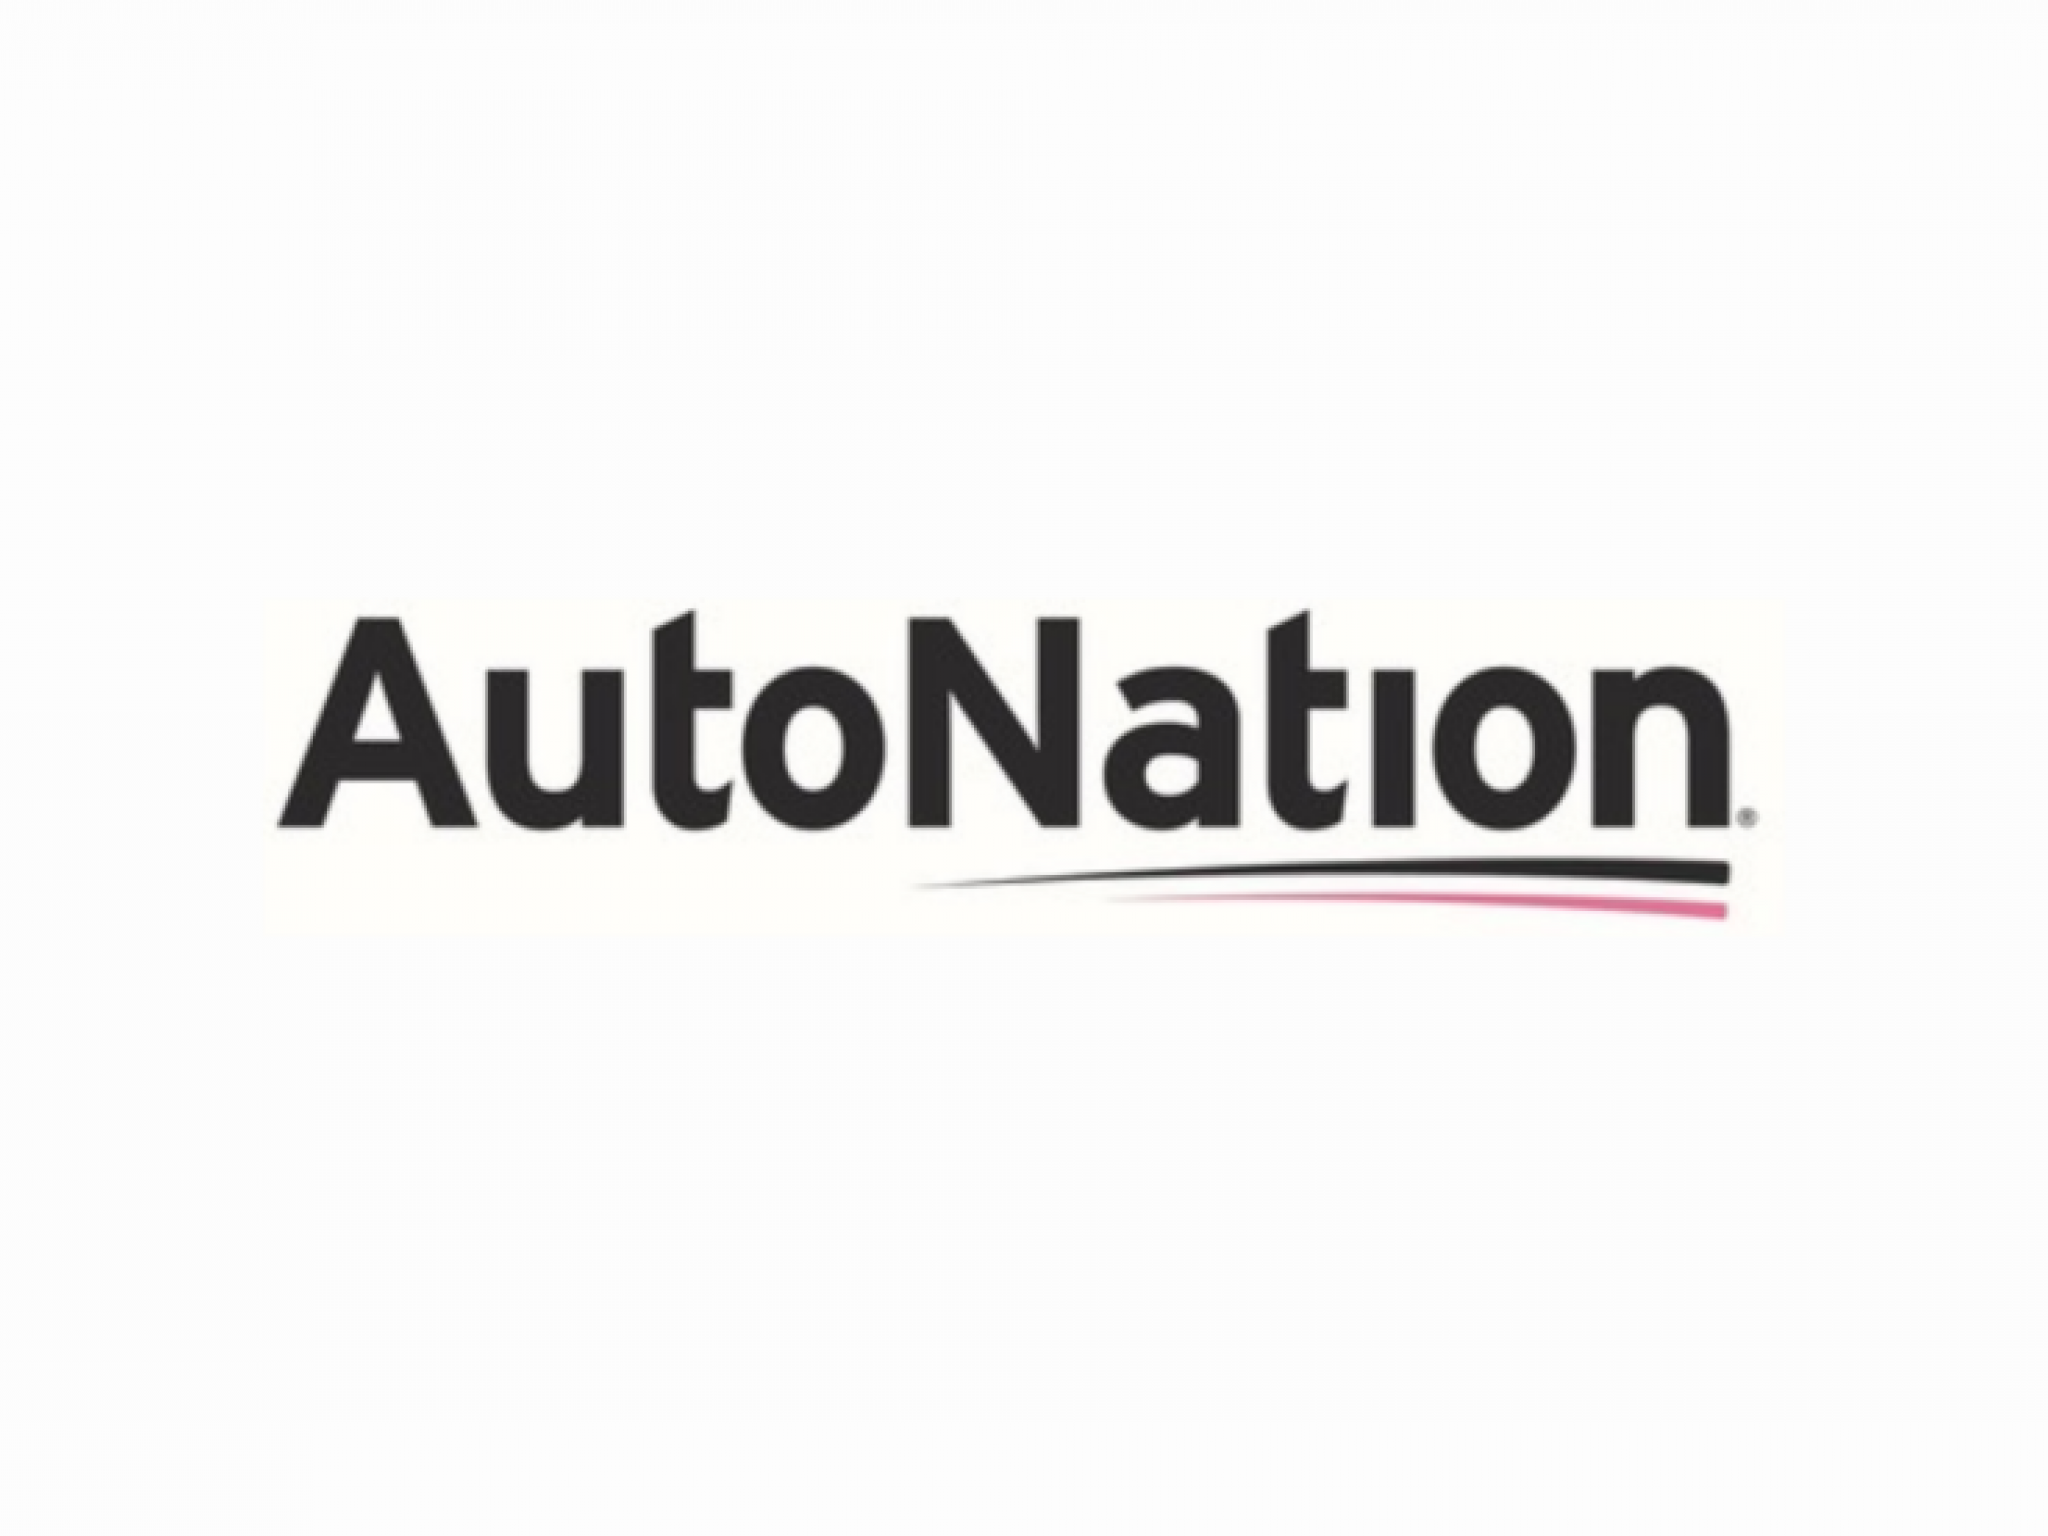  why-autonation-shares-are-falling-today 